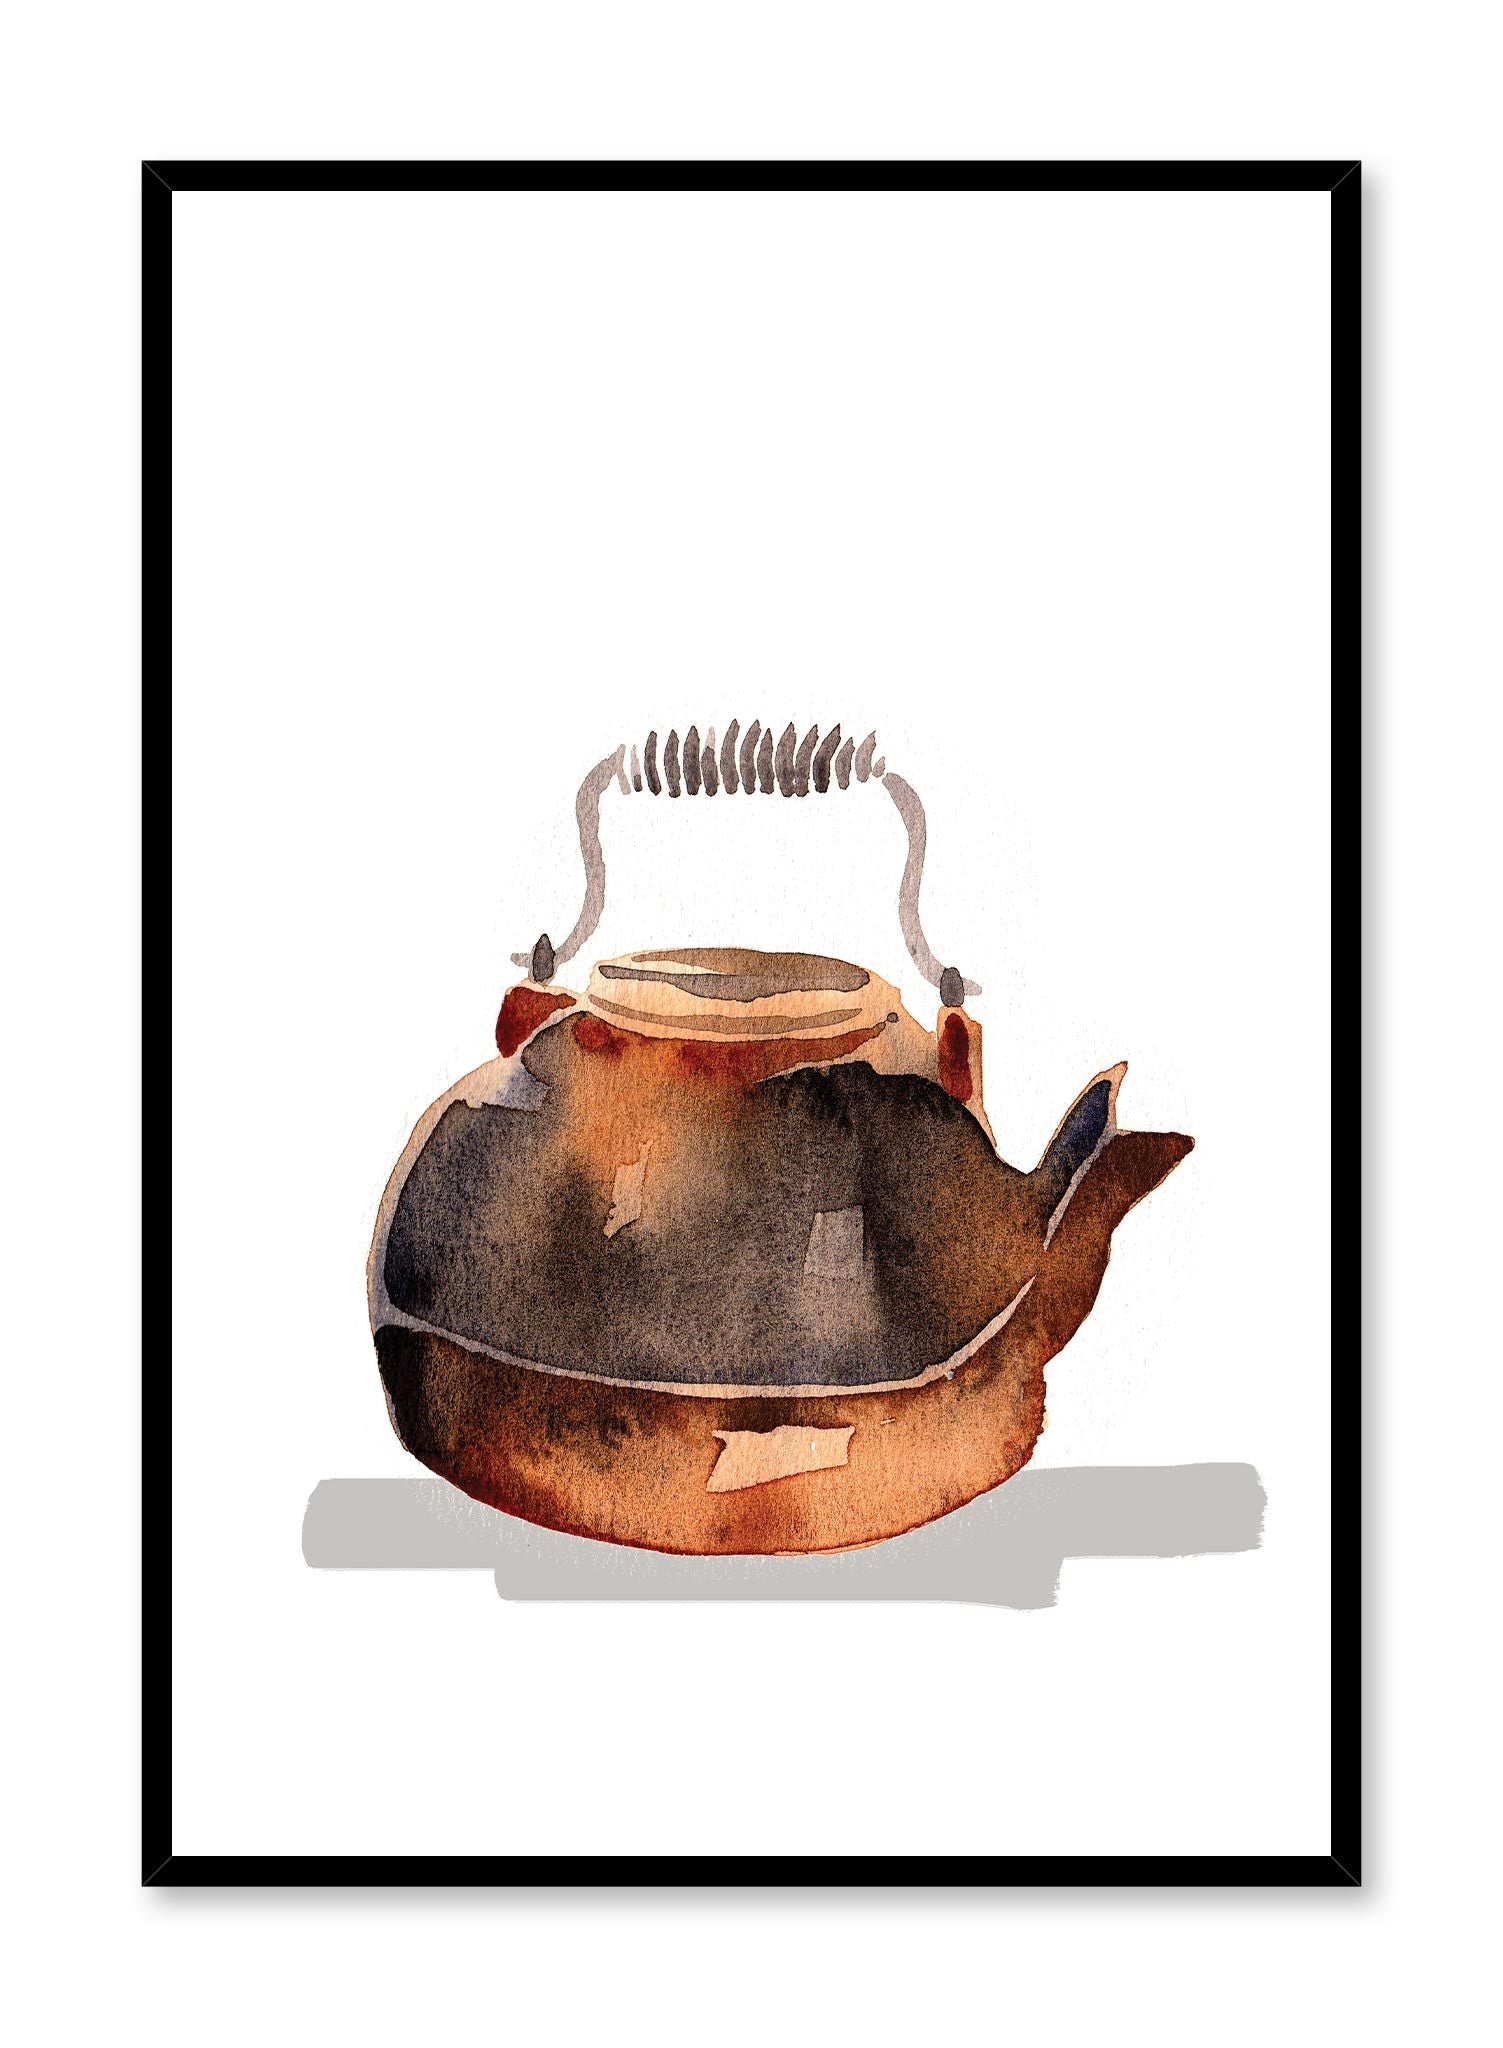 Kettle is a minimalist illustration by Opposite Wall of a brown traditional teapot with a twisted handle.